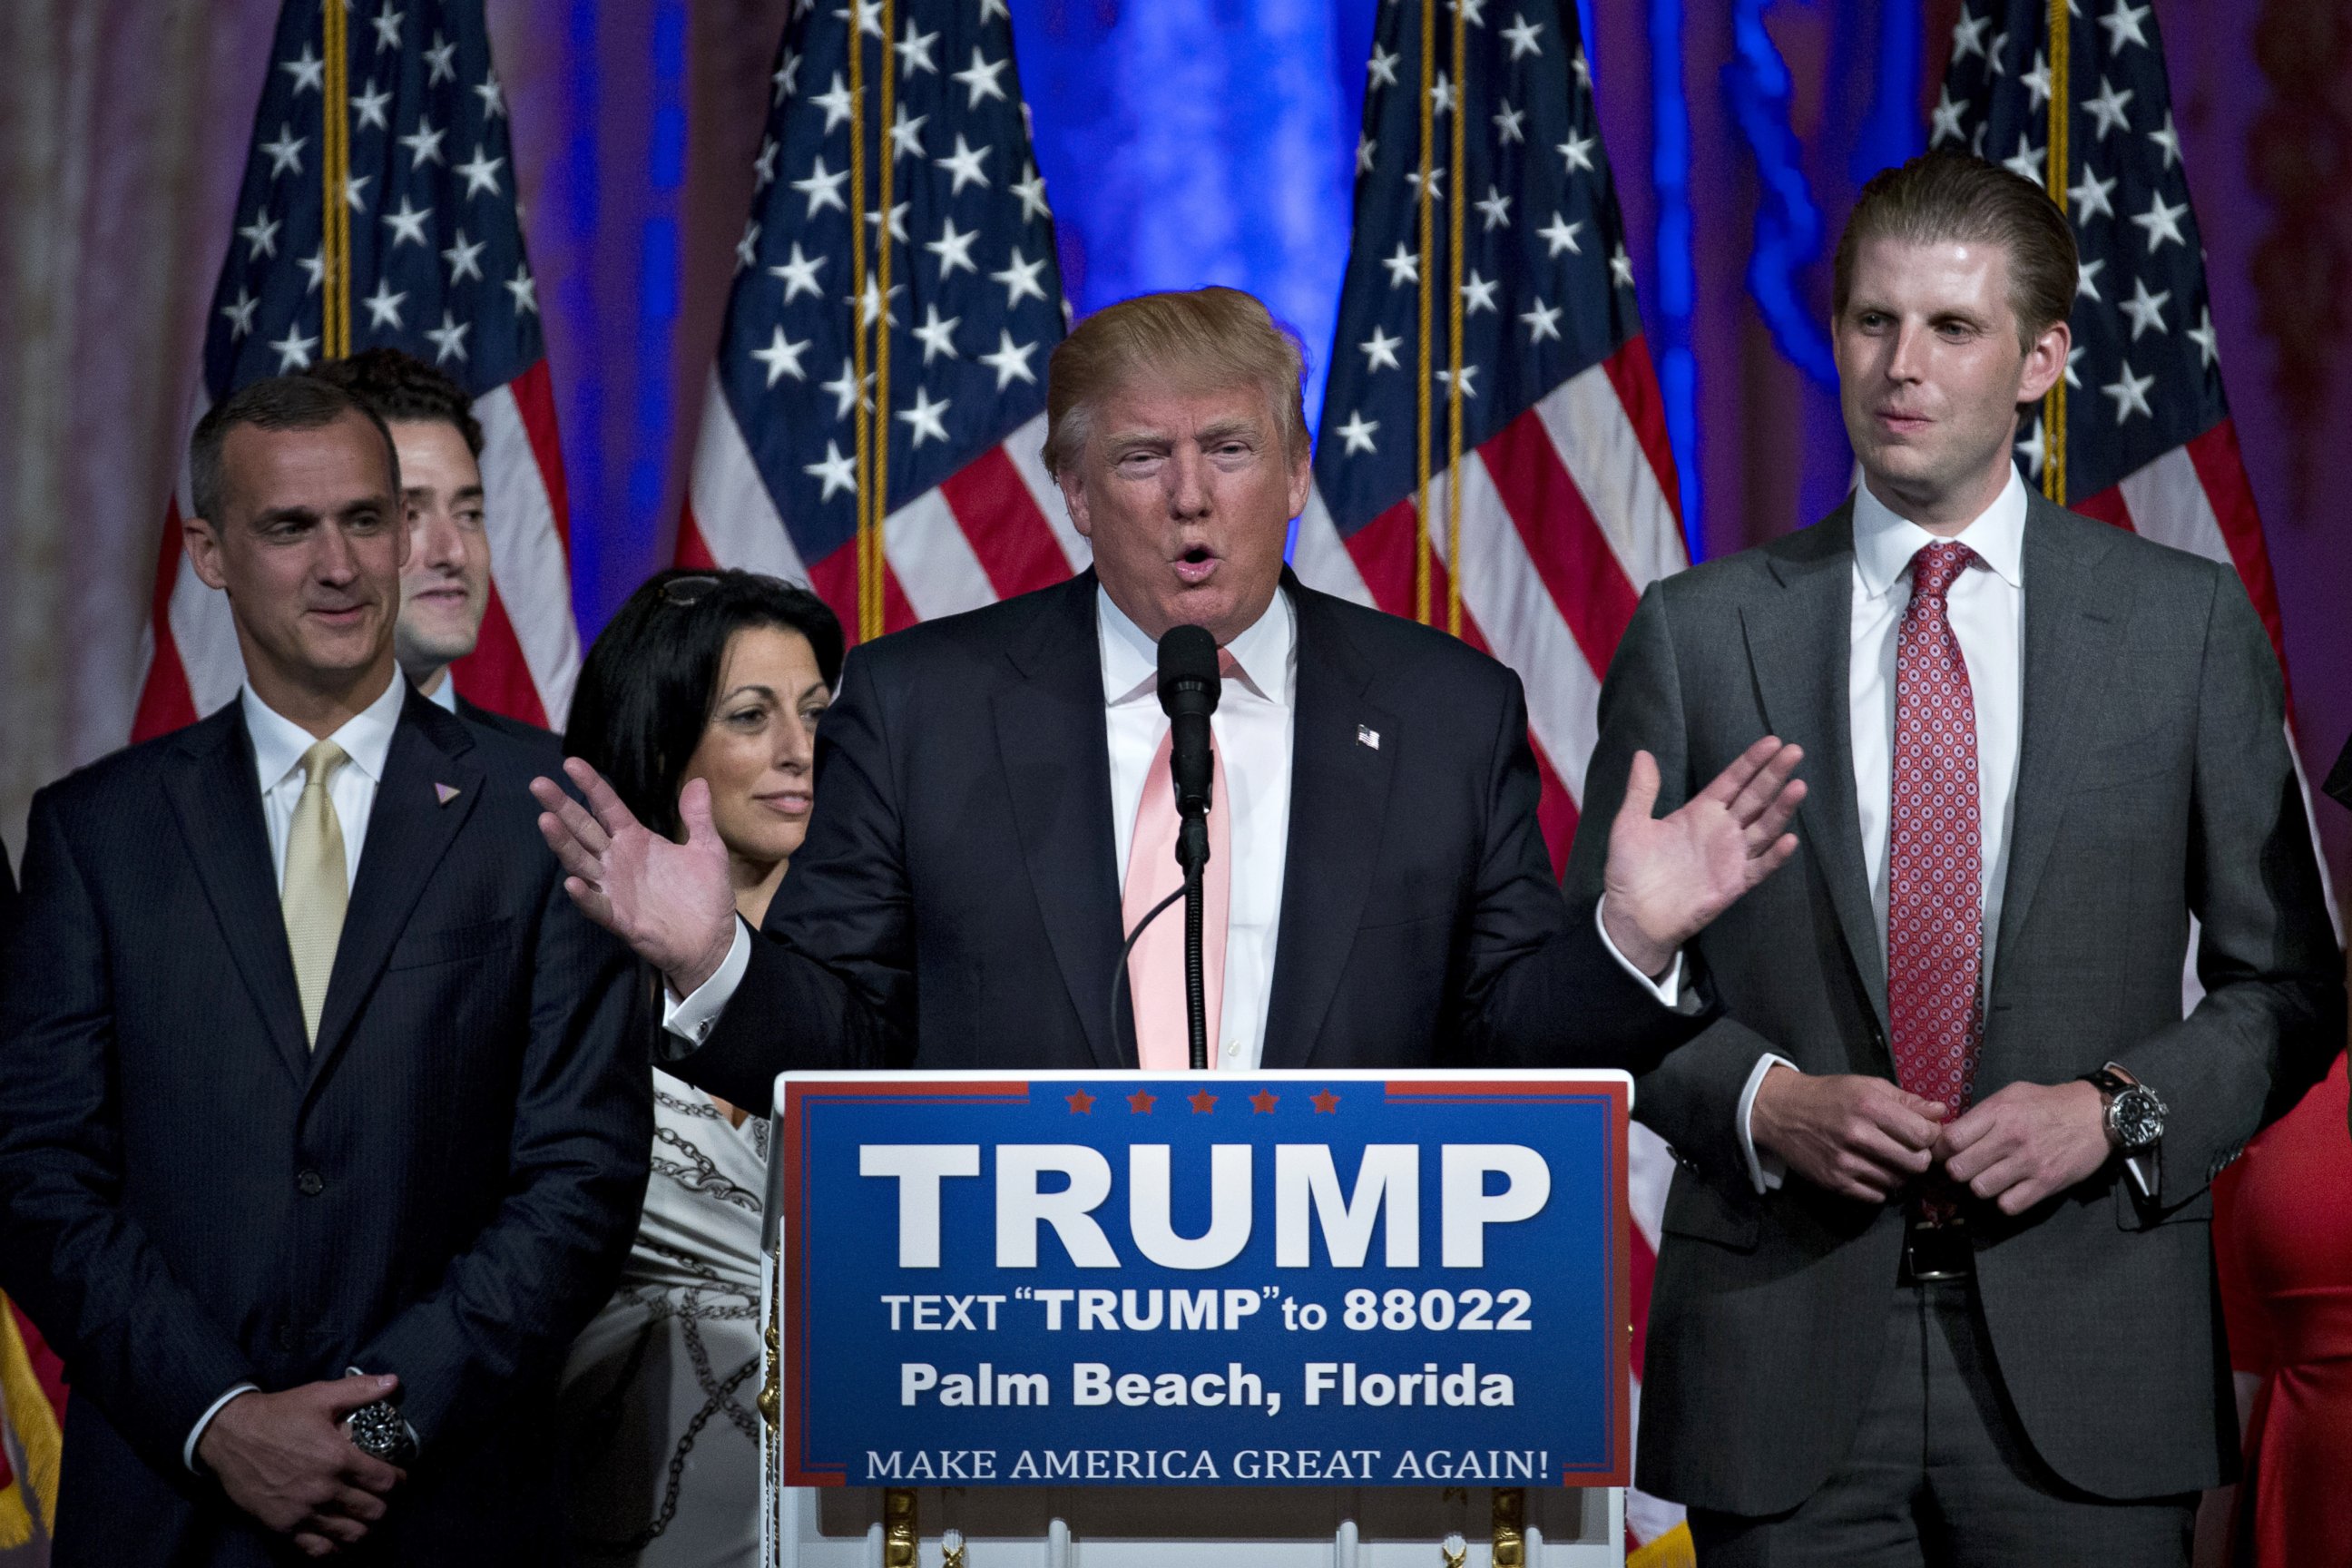 PHOTO: Donald Trump, center, speaks during a news conference with his son Eric Trump, right, and Corey Lewandowski, campaign manager for Trump, left, at the Mar-A-Lago Club in Palm Beach, Florida, March 15, 2016.